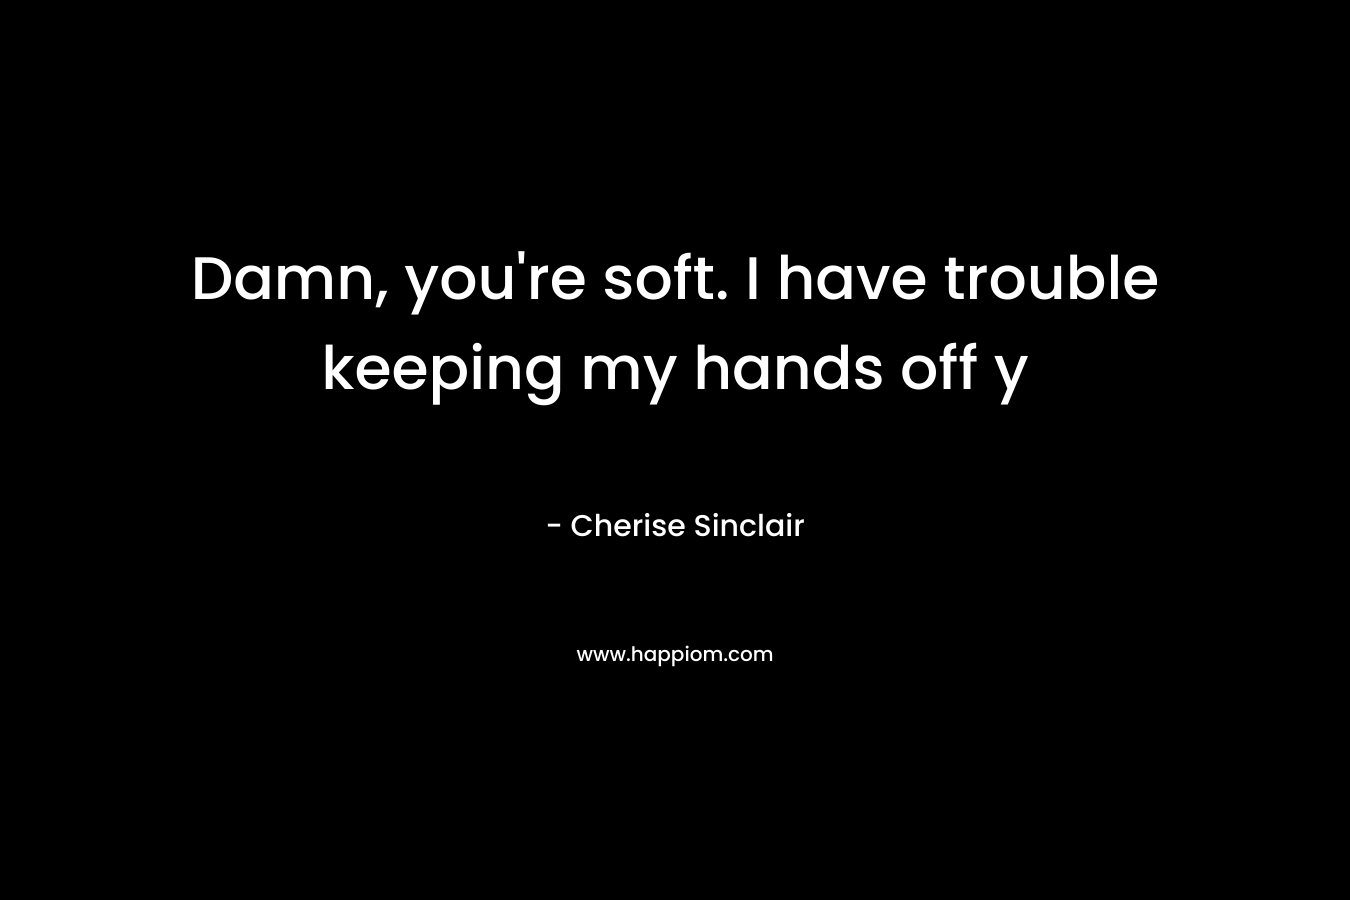 Damn, you’re soft. I have trouble keeping my hands off y – Cherise Sinclair